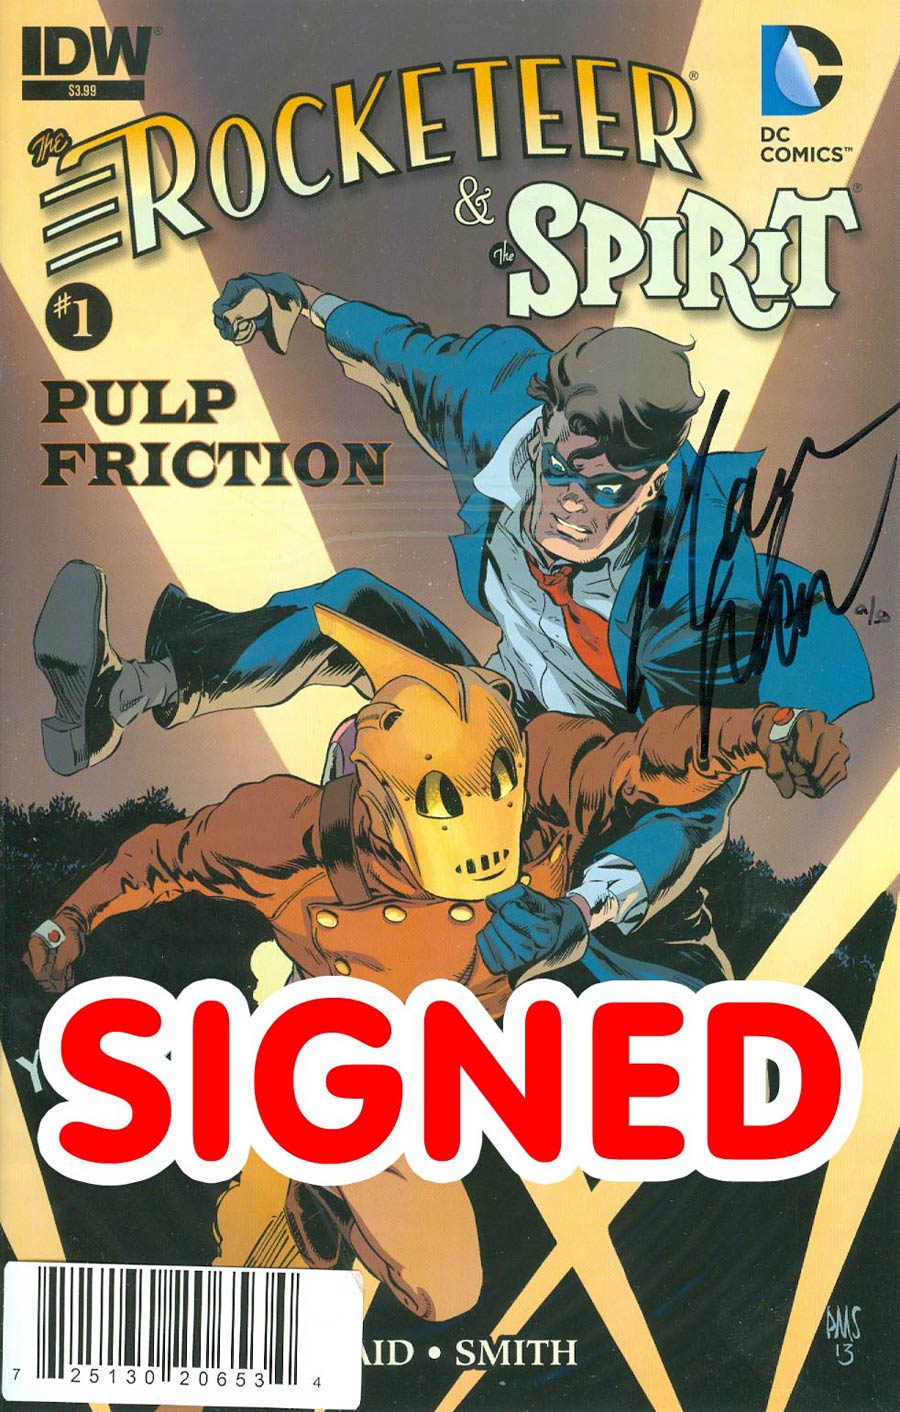 Rocketeer Spirit Pulp Friction #1 Cover C DF Signed By Mark Waid